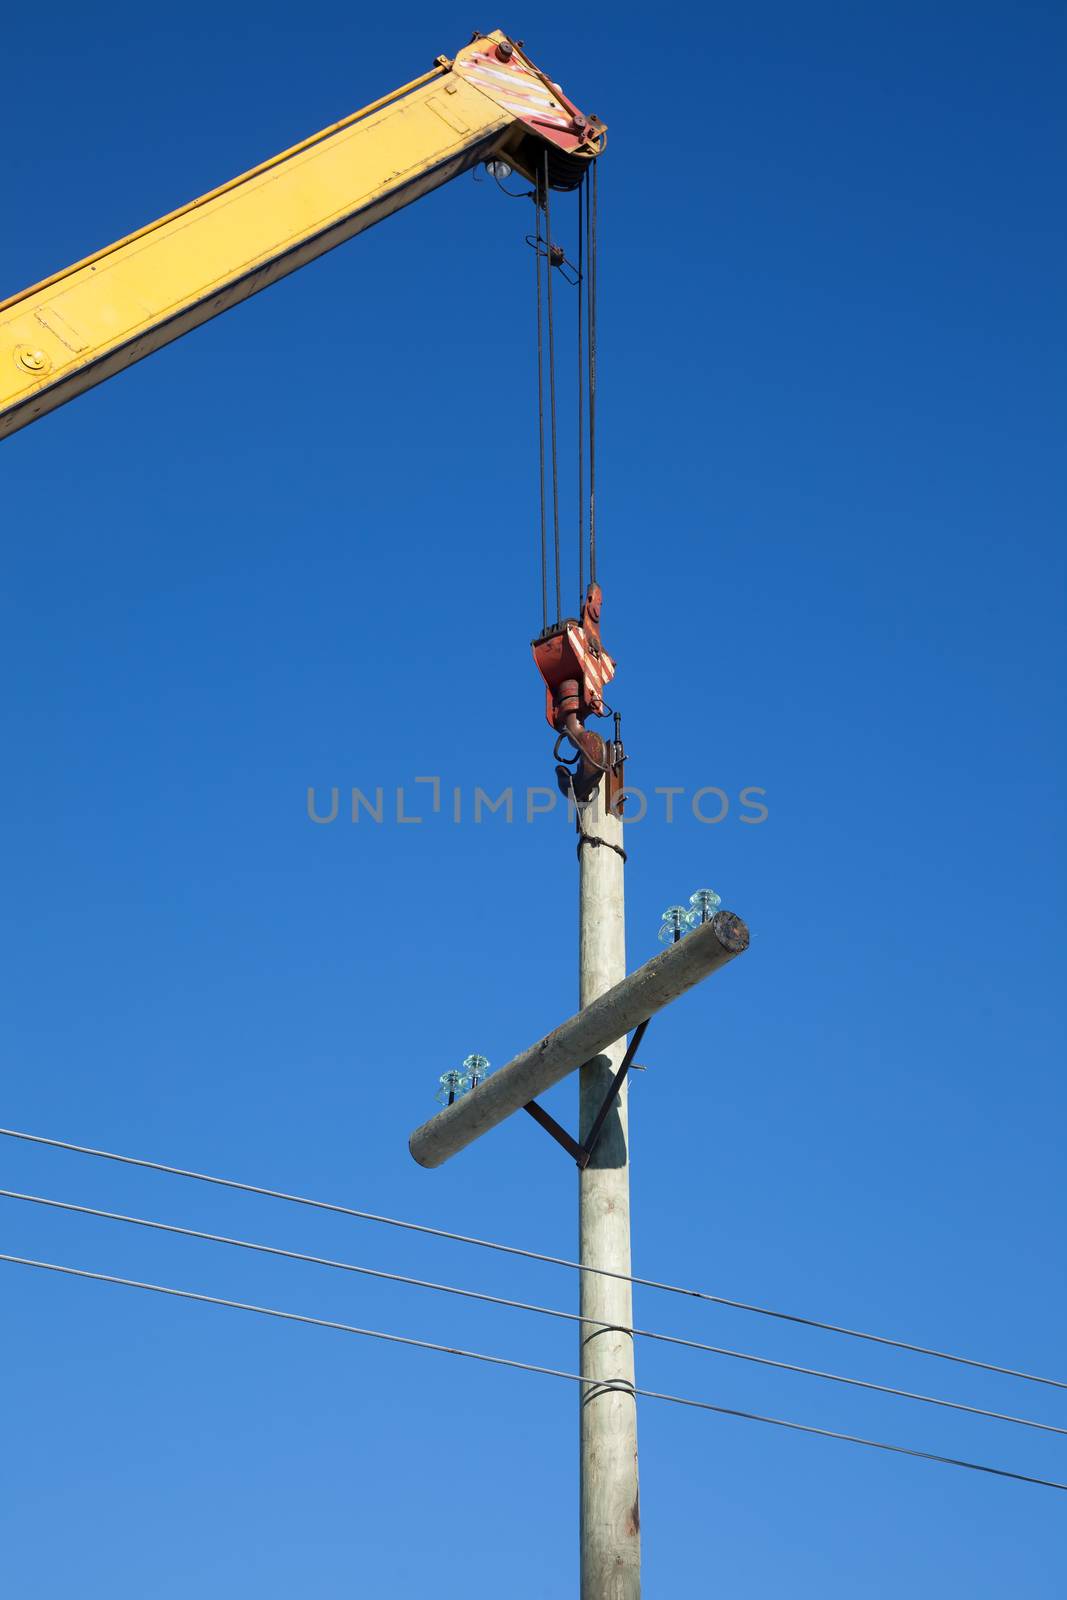 Installation of wooden electric poles crane. When the sunlight against the blue sky